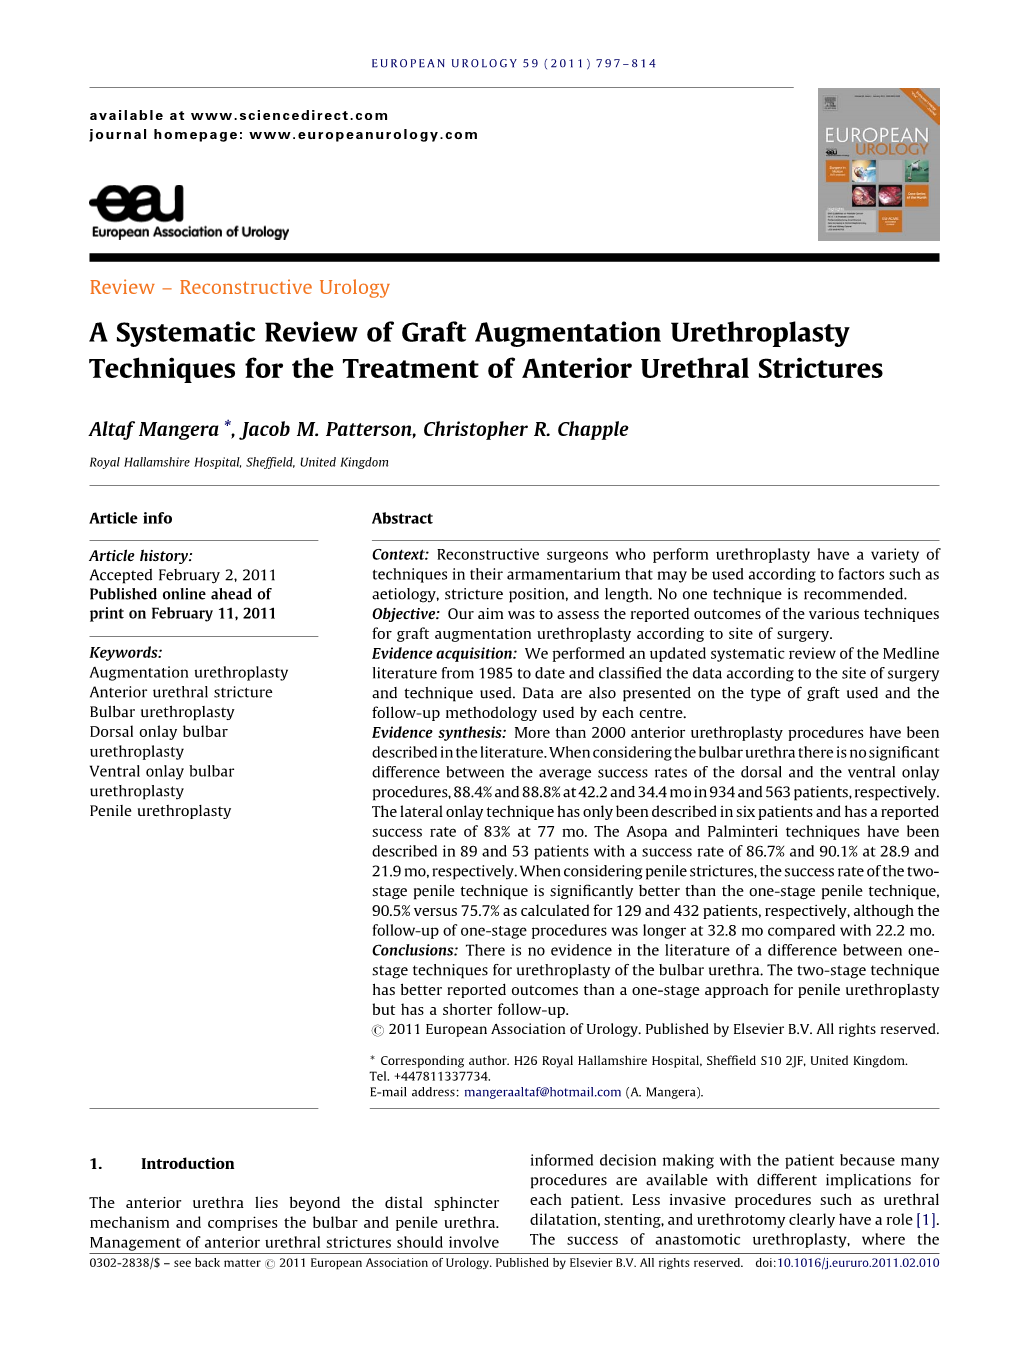 A Systematic Review of Graft Augmentation Urethroplasty Techniques for the Treatment of Anterior Urethral Strictures